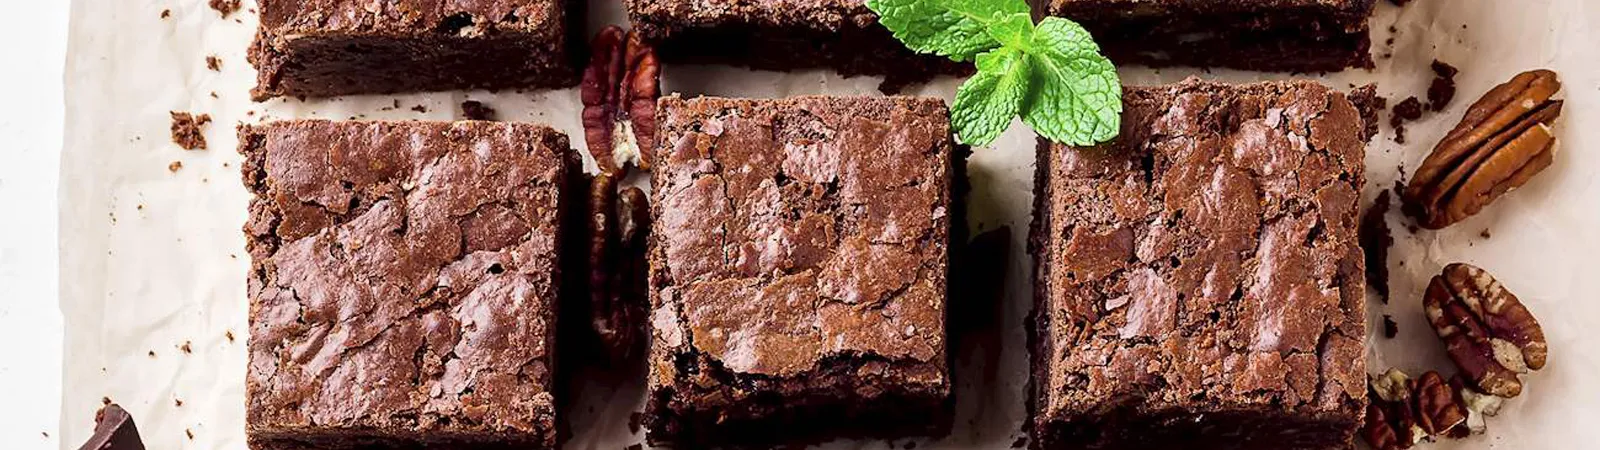 Brownies, United States re sized image